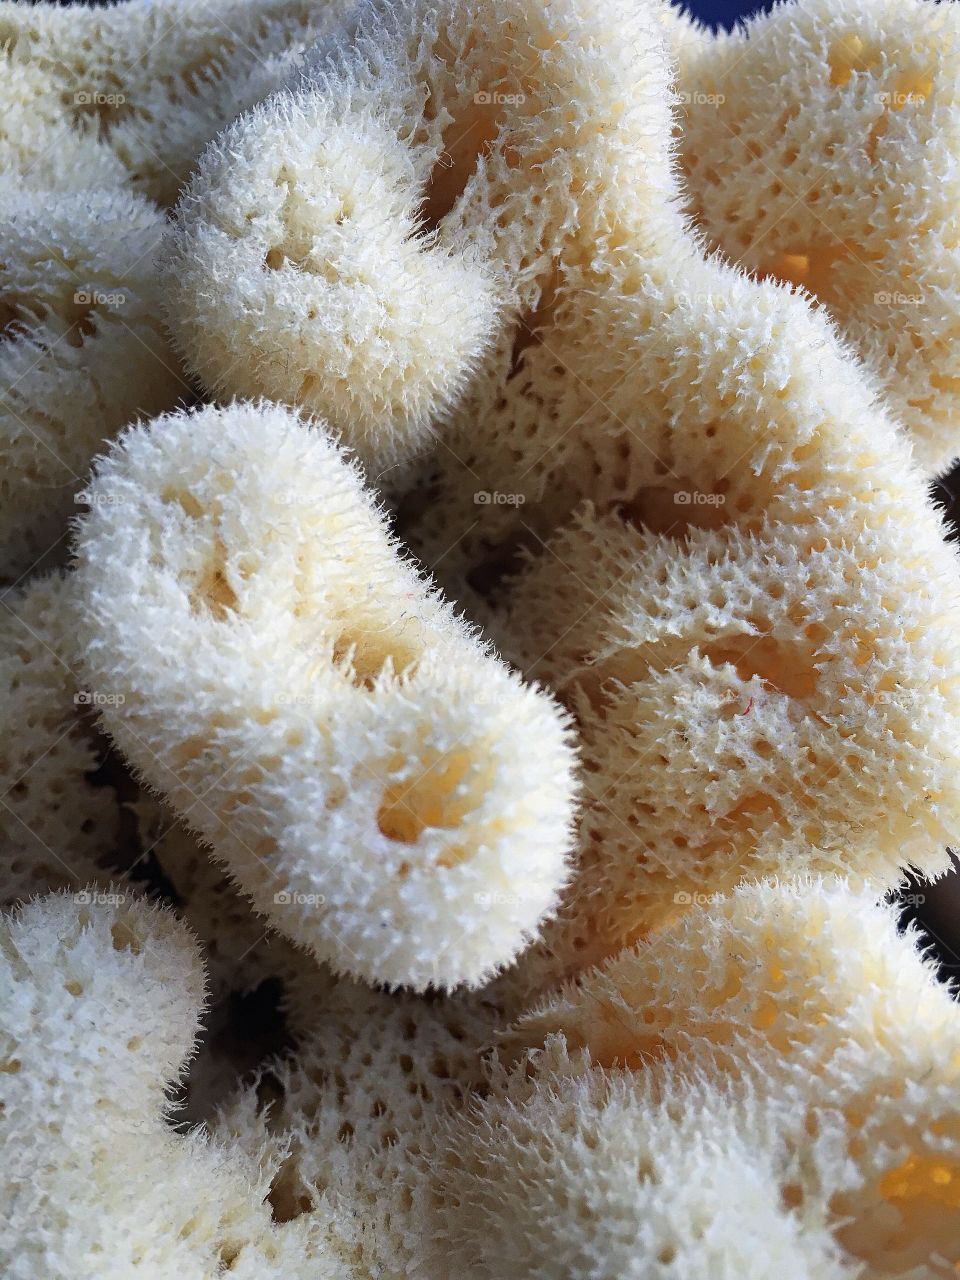 Sponge. An incredible sea creature, with an amazing architecture. Too fascinating to just be used for a bath...